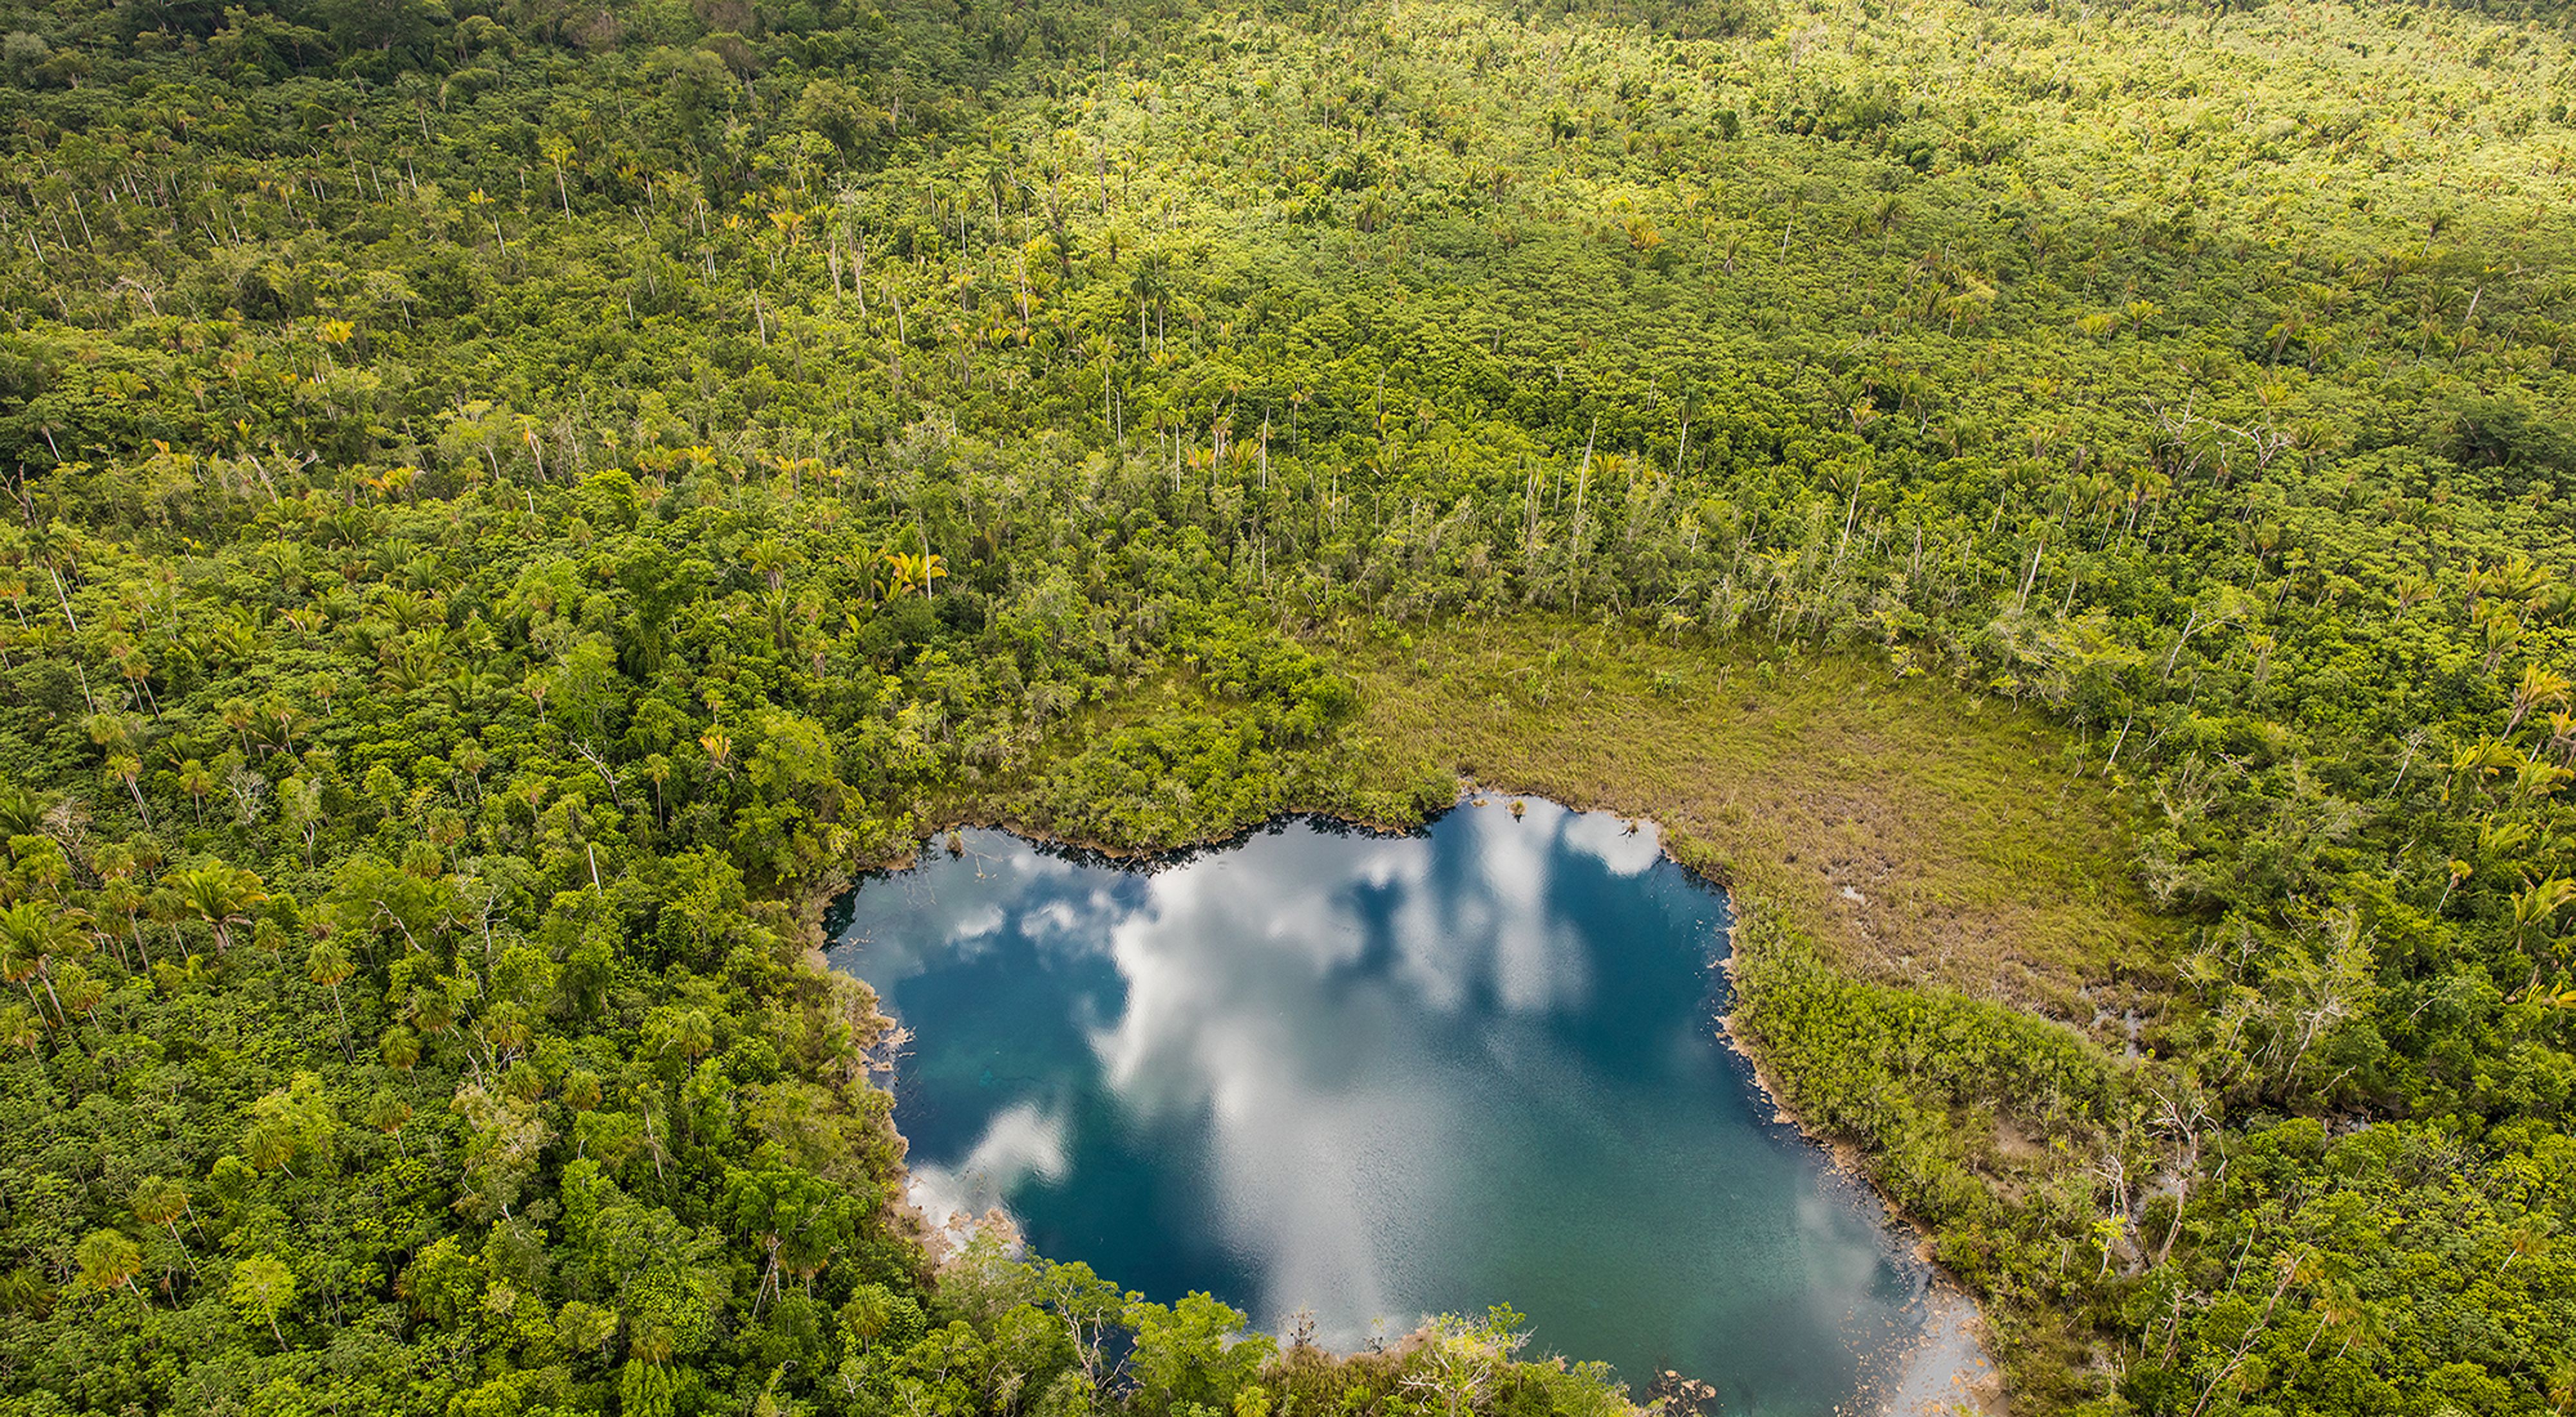 An aerial view of Cara Blanca Pool 19, one of 24 cenotes that support a rich diversity of fish, wildlife and archaeological sites.